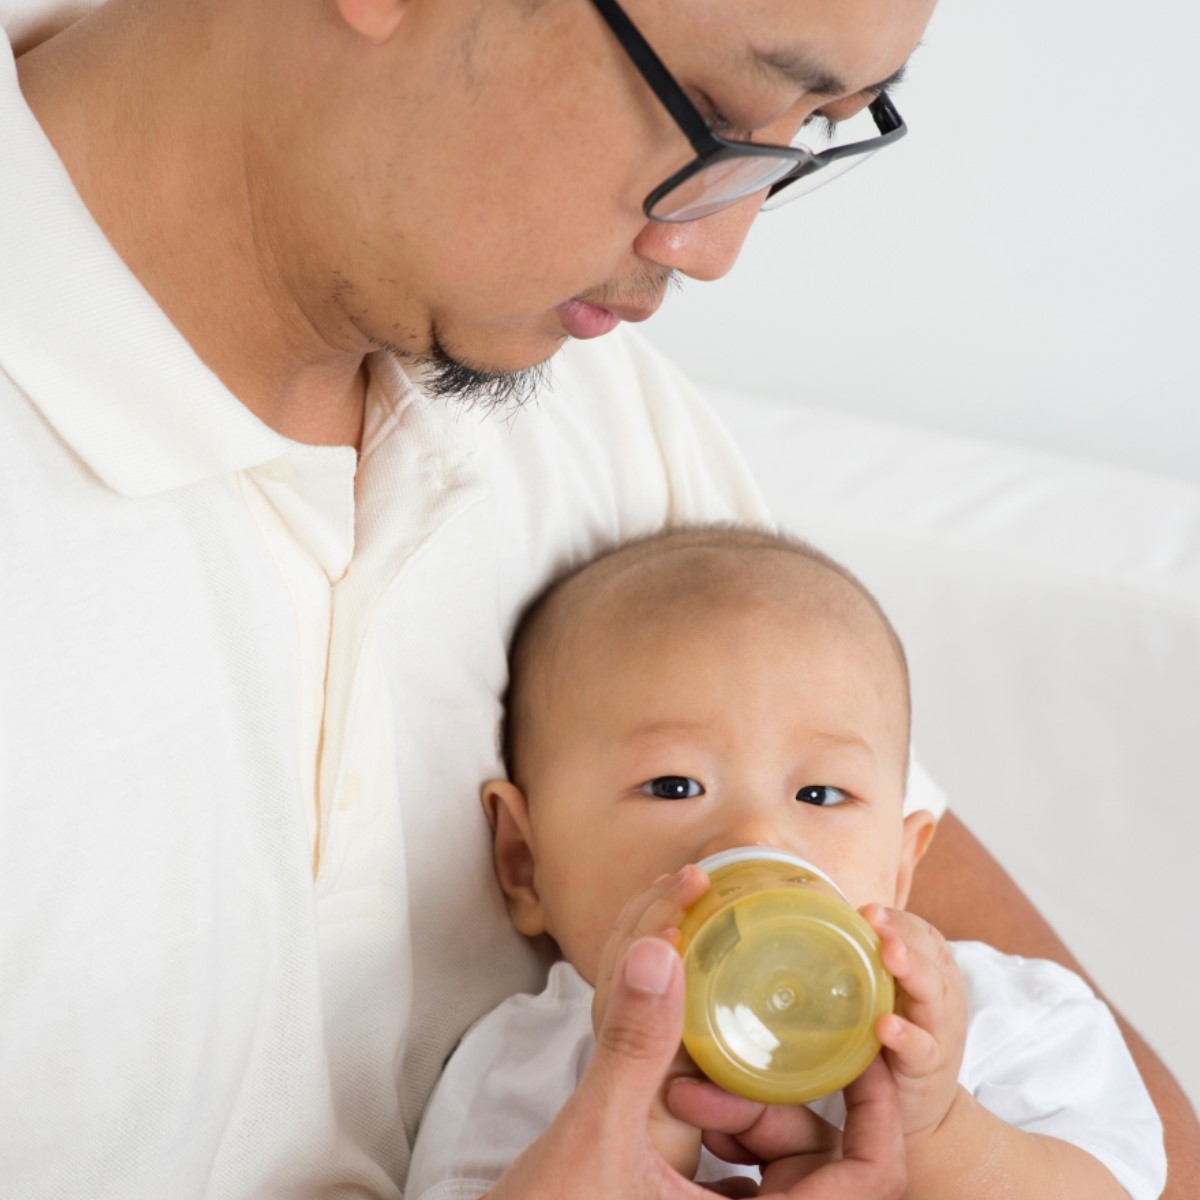 A person feeding a baby with a bottle